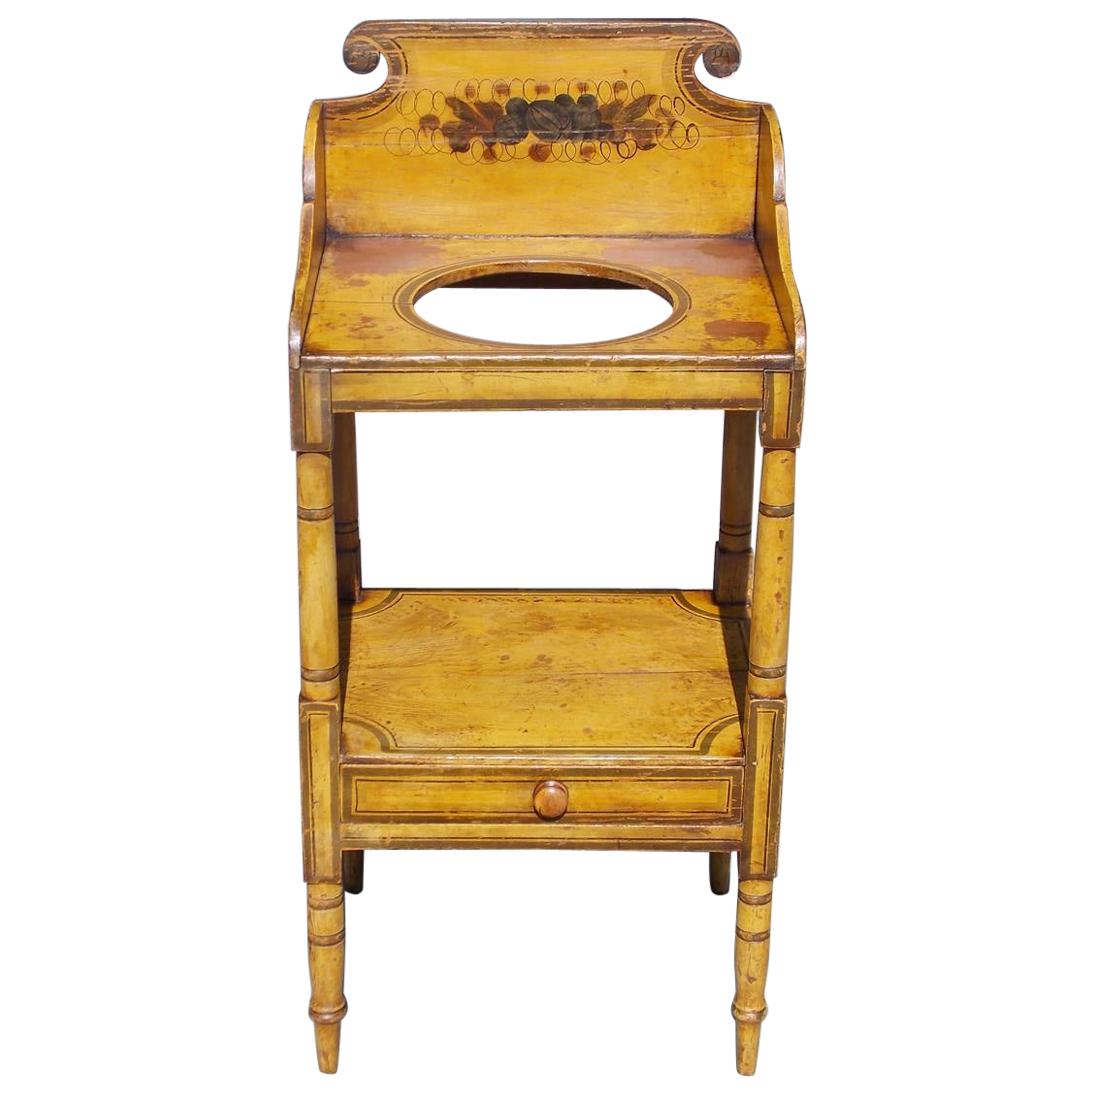 American Sheraton Pine Hand Painted Floral Single Drawer Washstand, Circa 1830